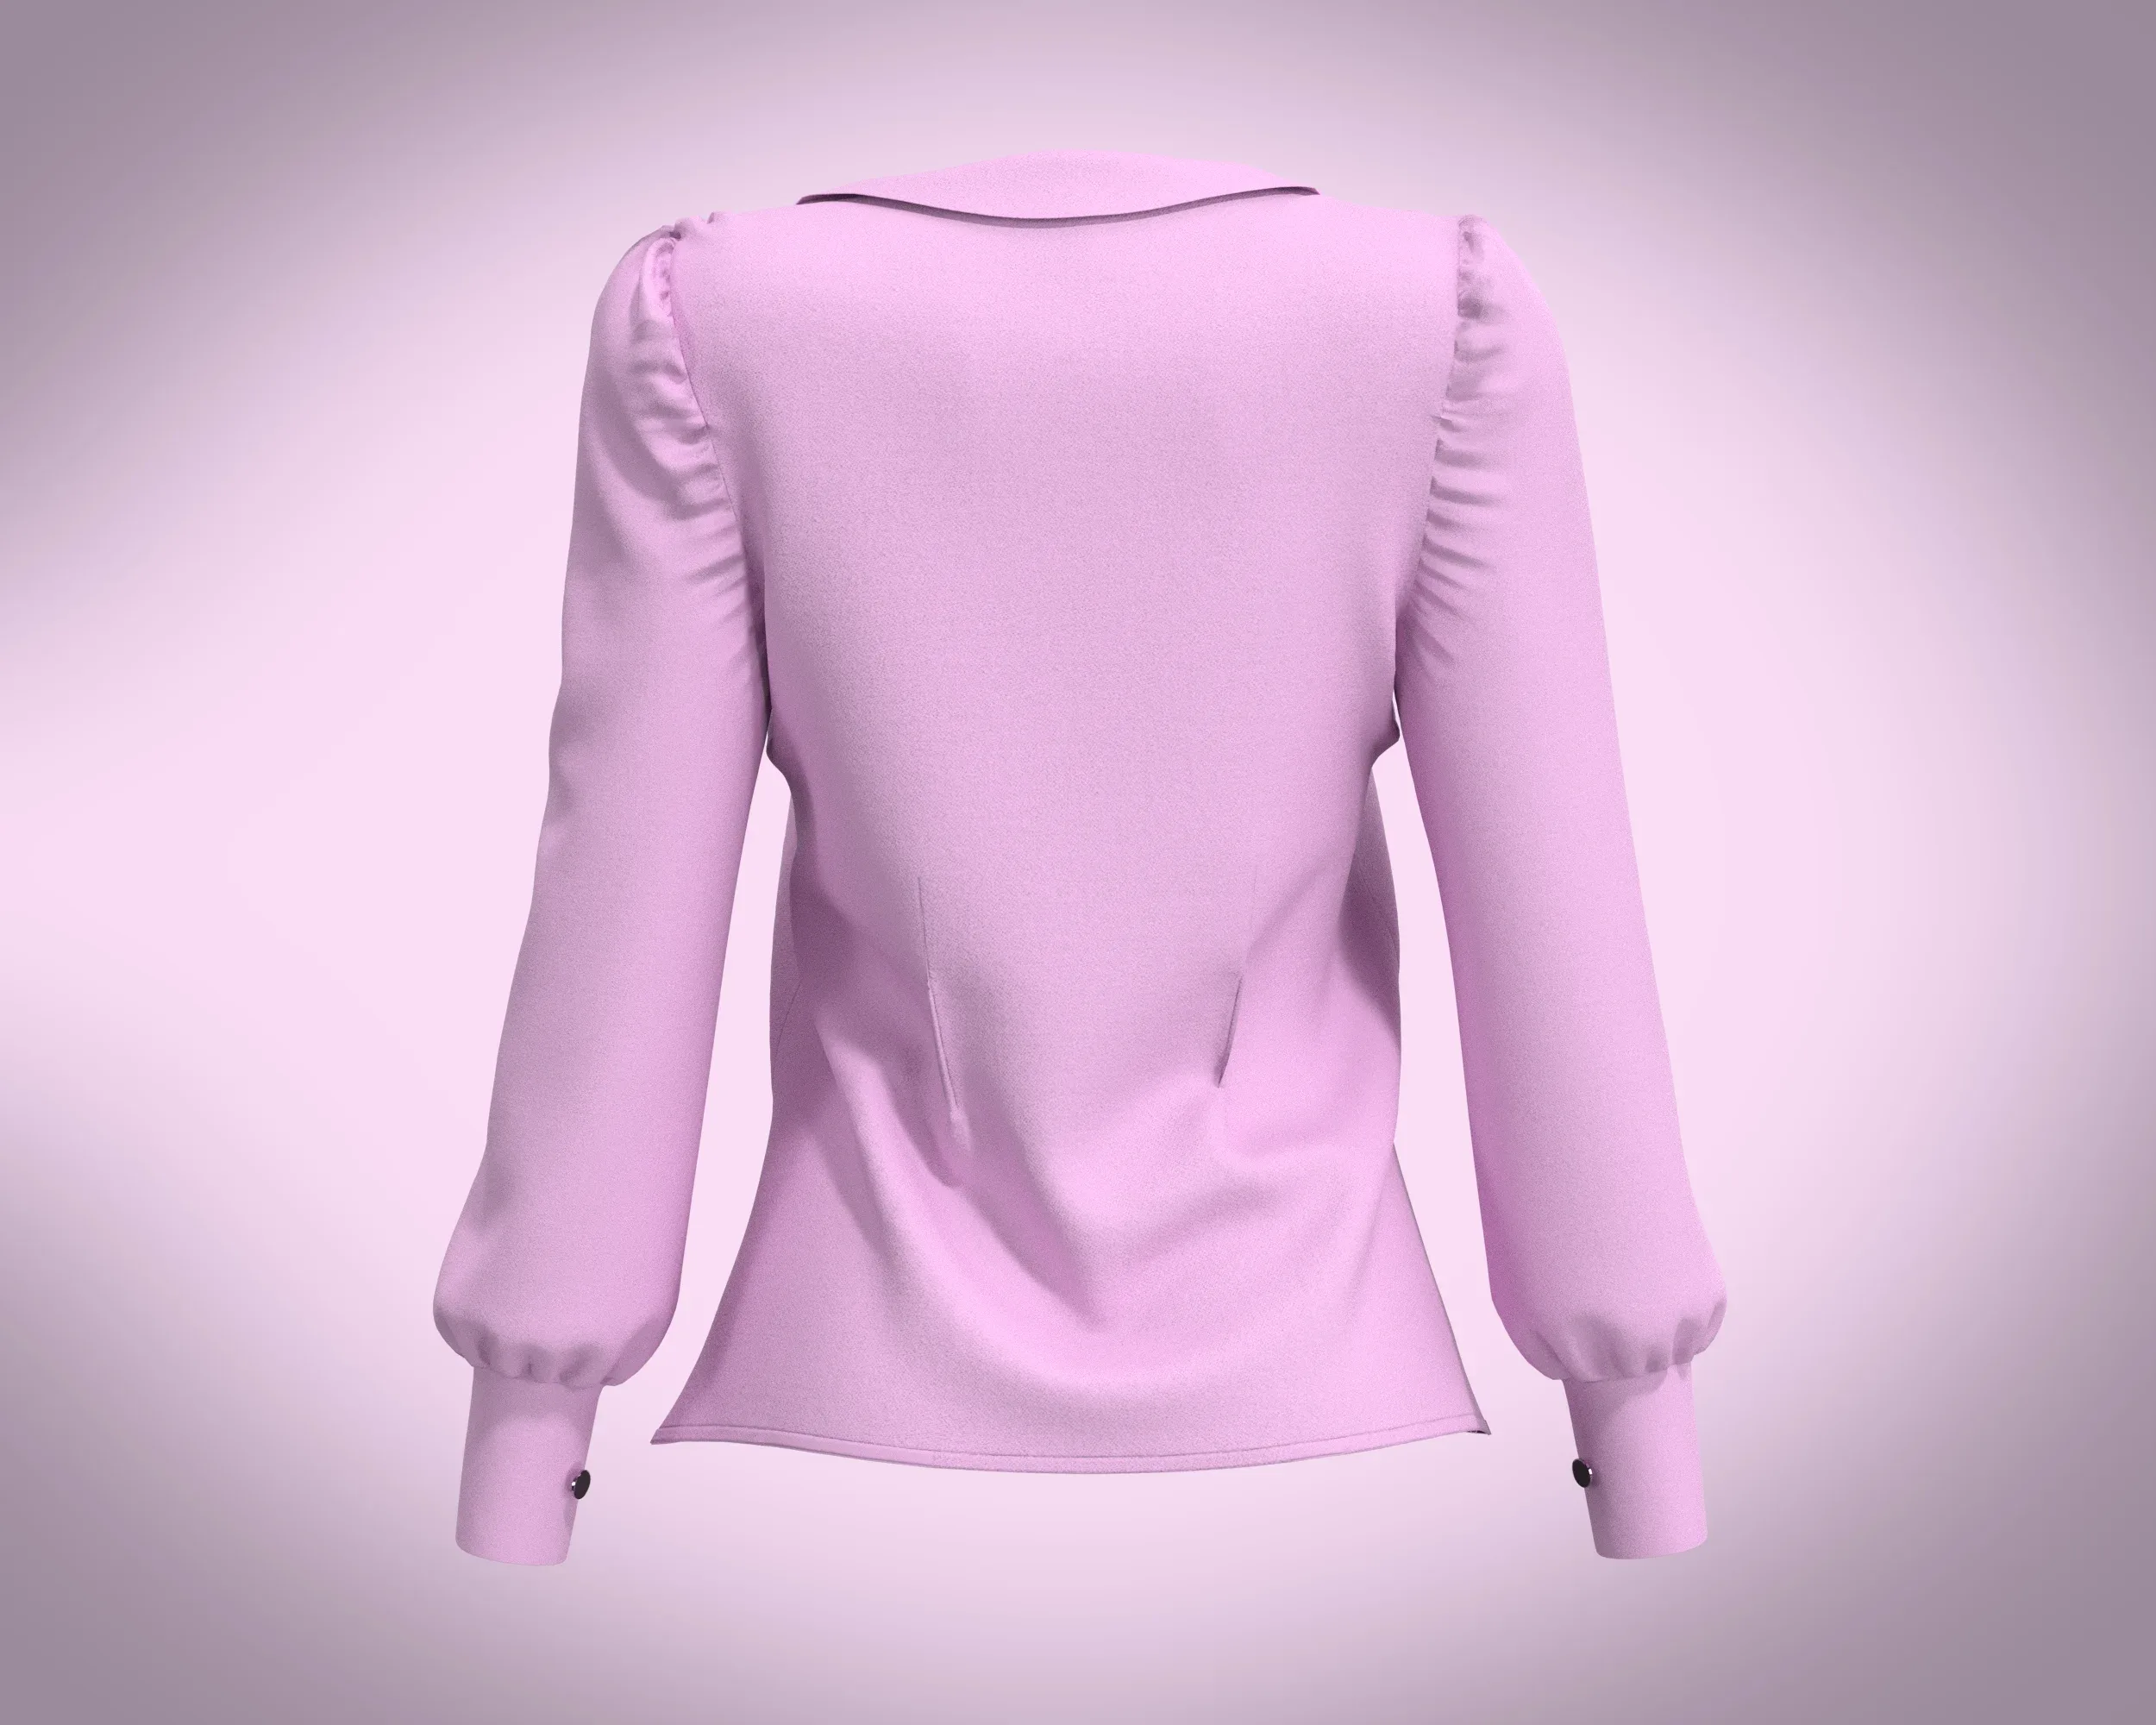 THE FITTED LOLA TOP | Marvelous / Clo3d / obj / fbx